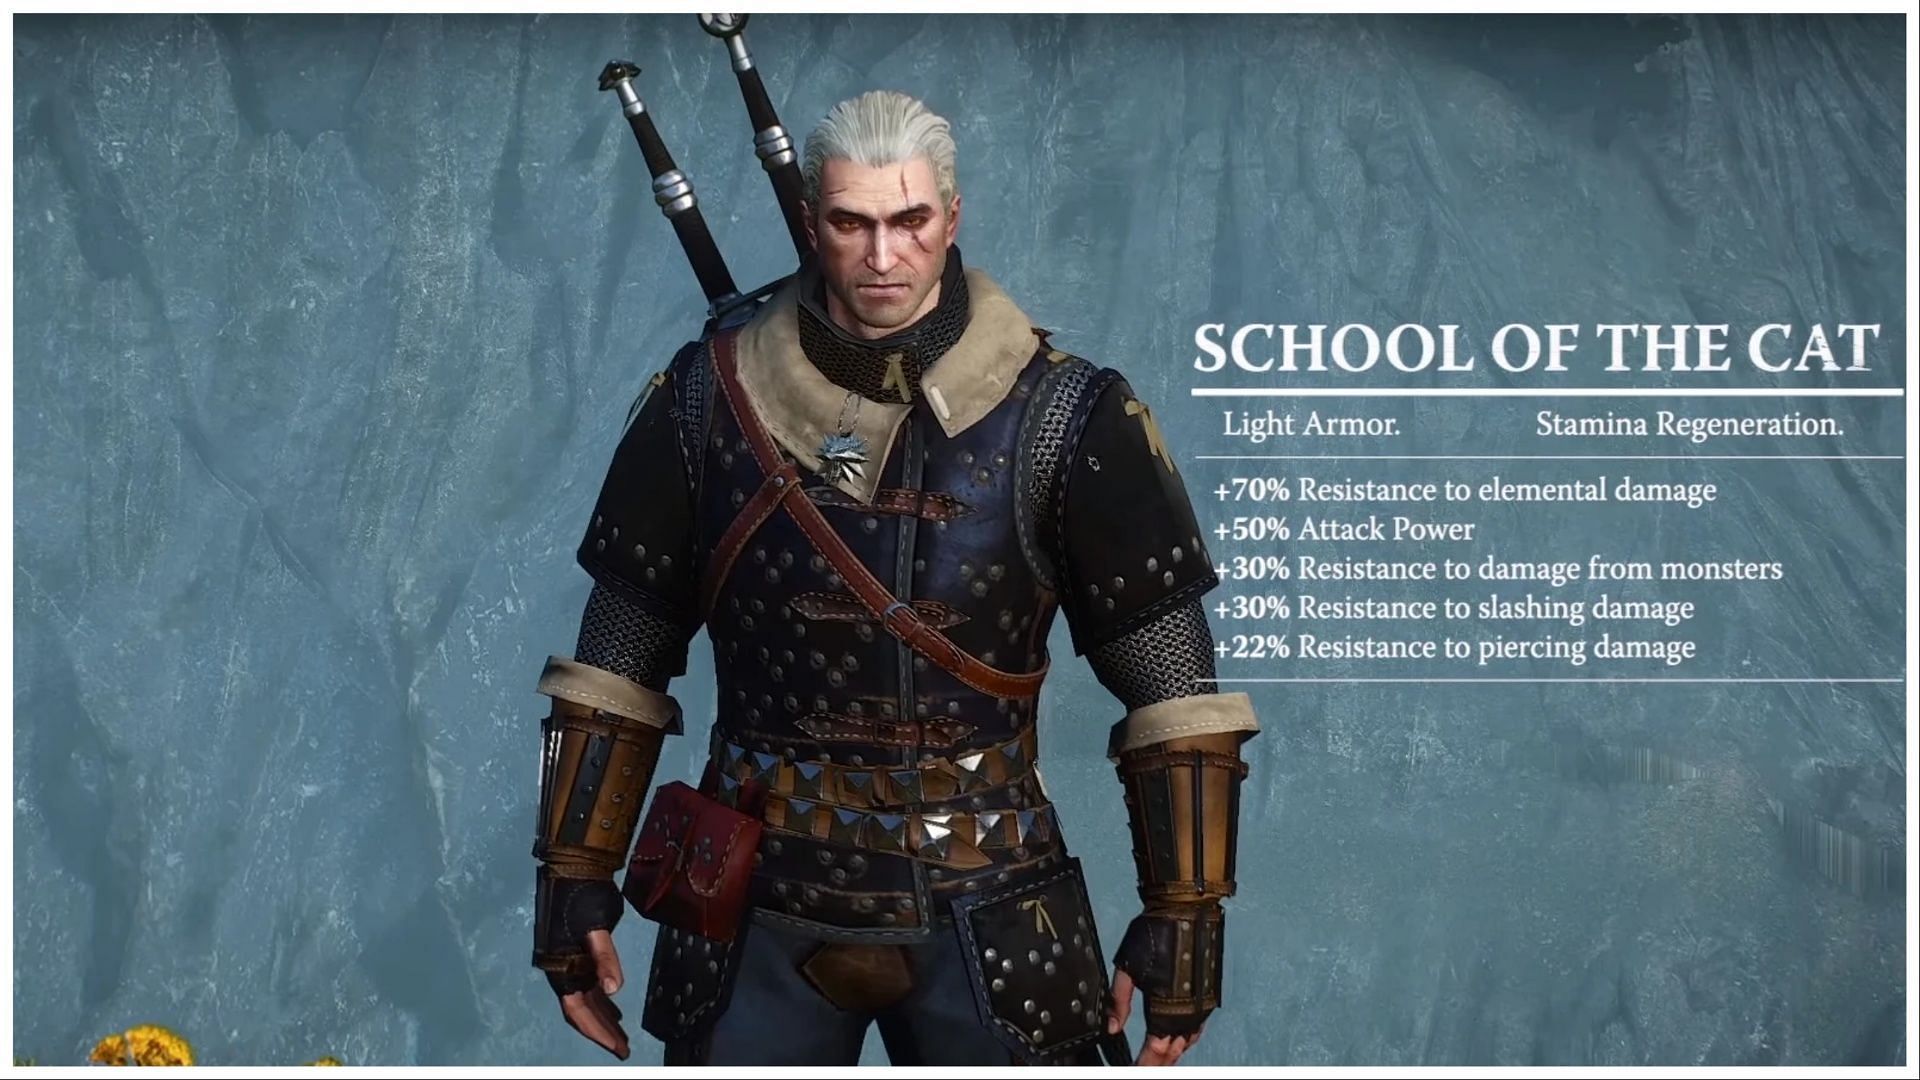 Feline Armor Set is one of the most powerful armor sets in The Witcher 3 (Image via CD Projekt Red)